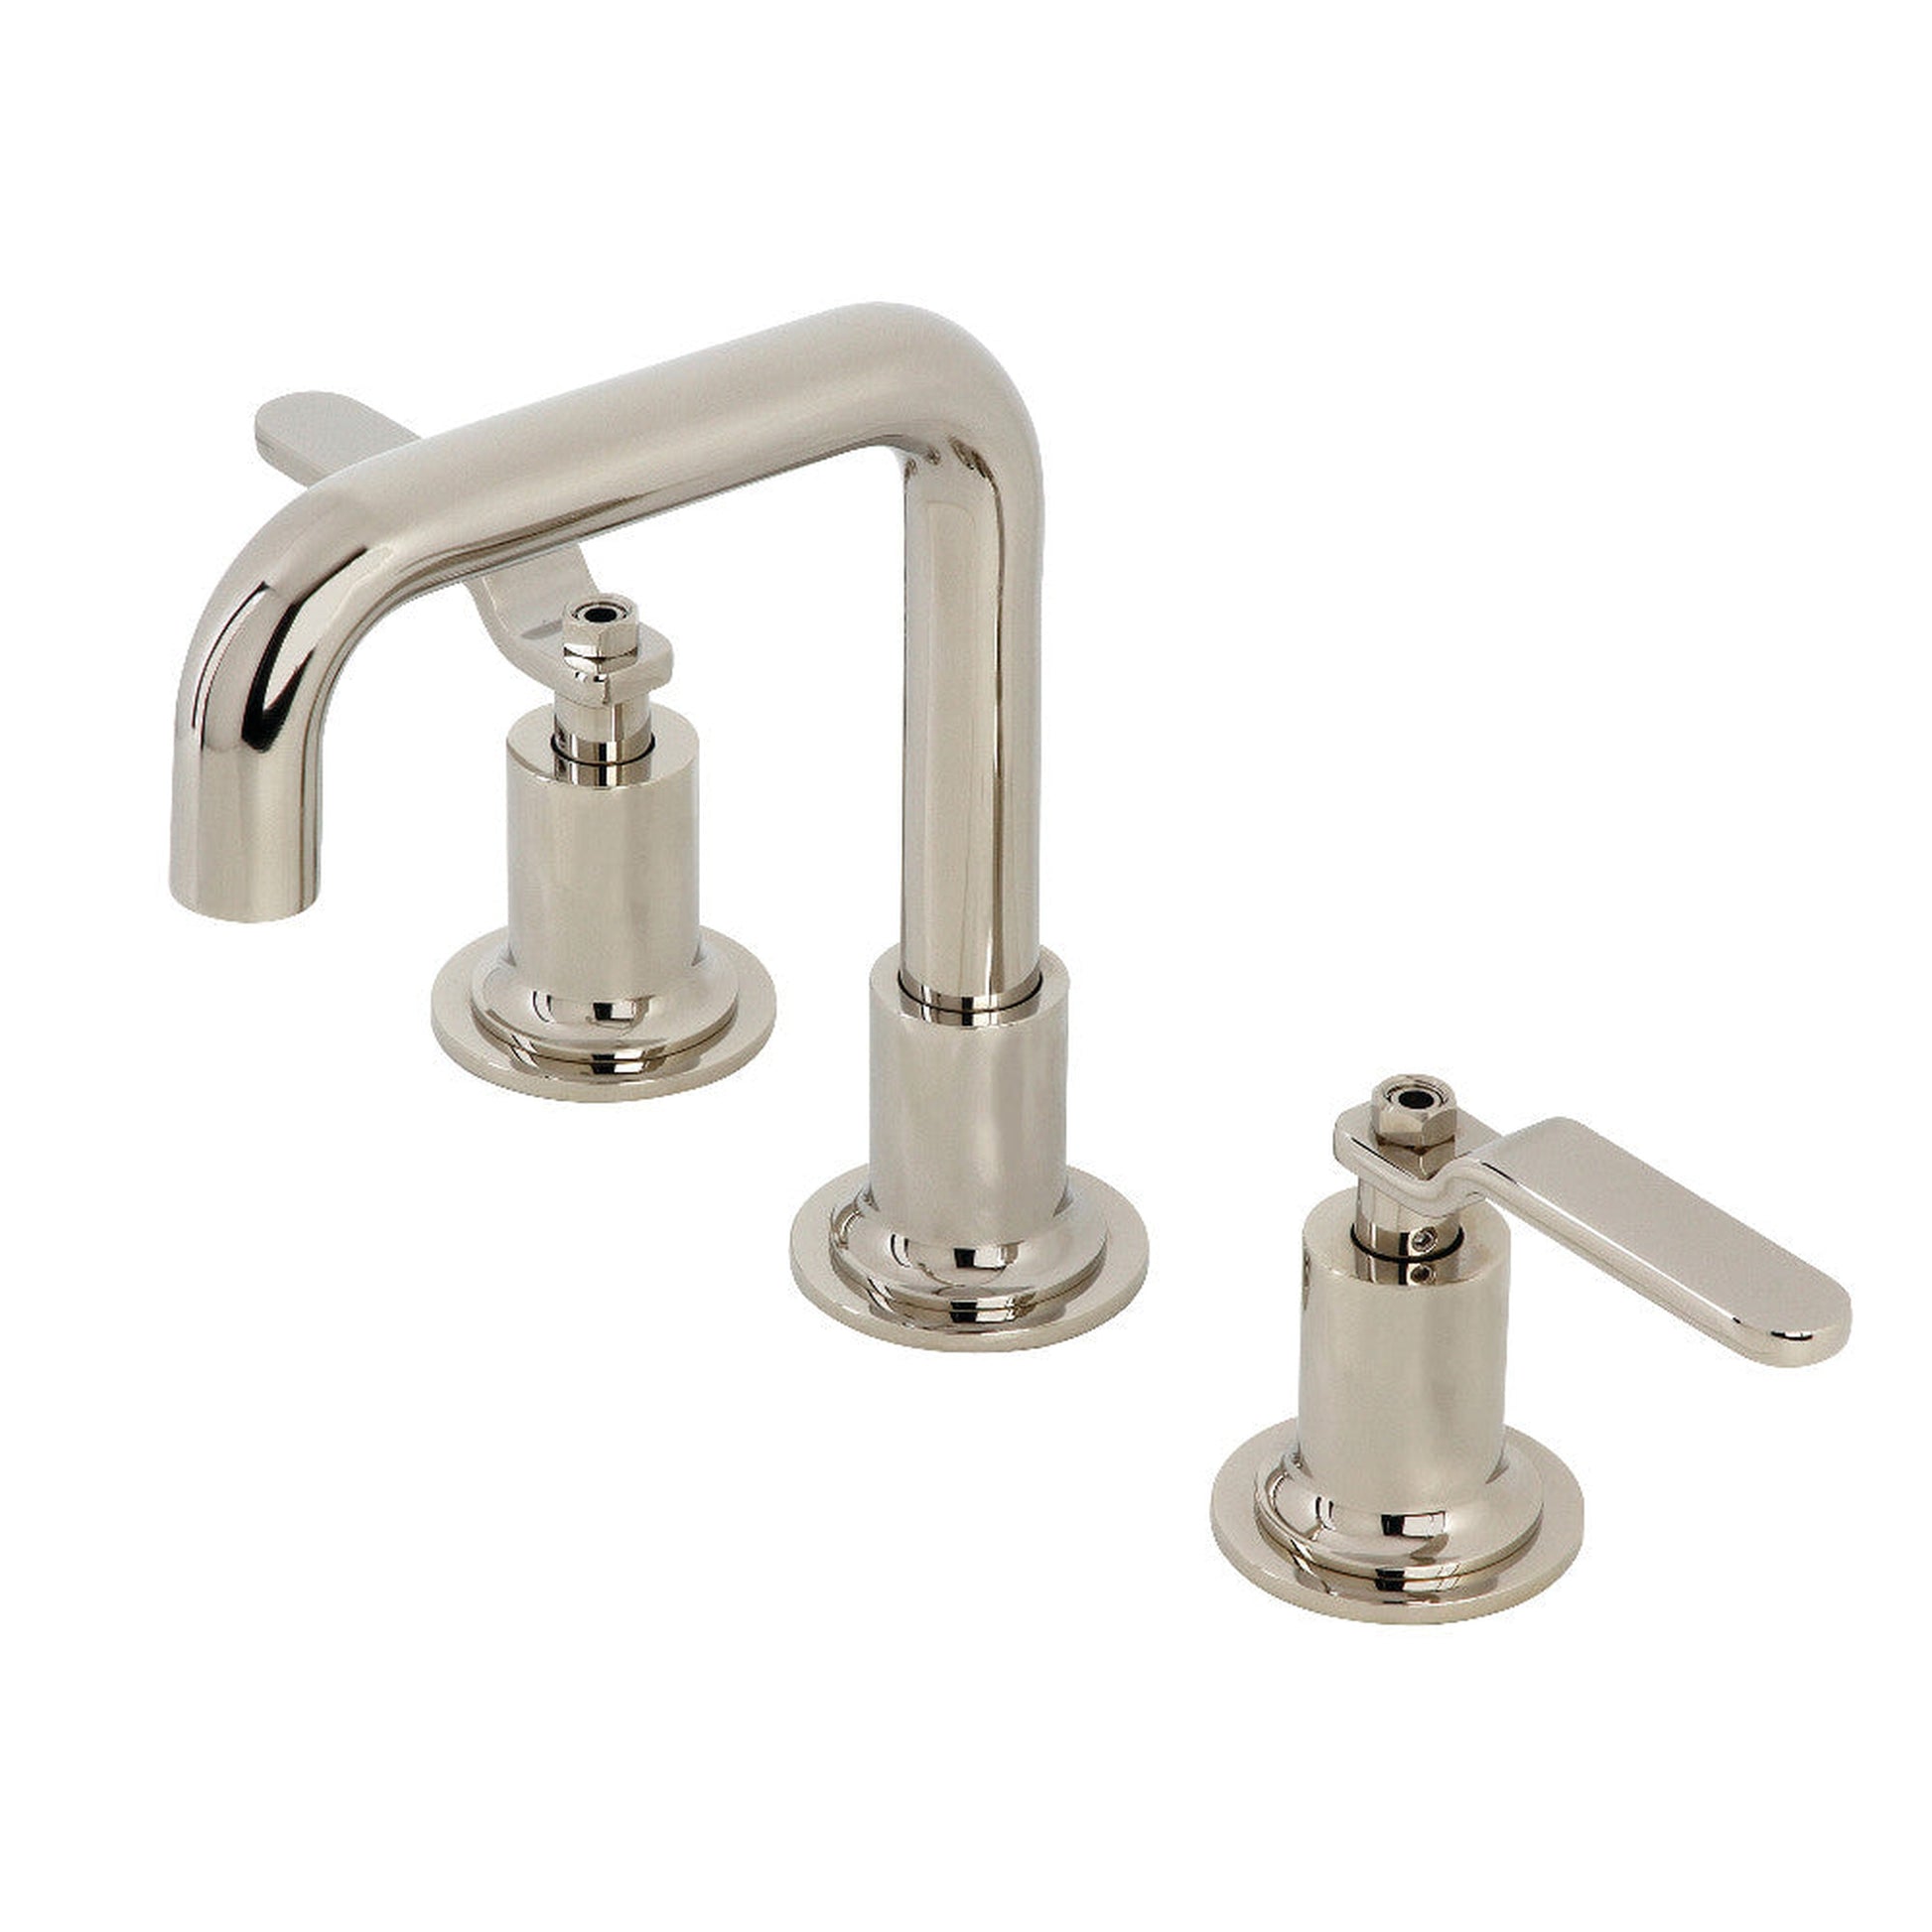 Kingston Brass KS142KLPN Whitaker Widespread Bathroom Faucet with Push Pop-Up, Polished Nickel